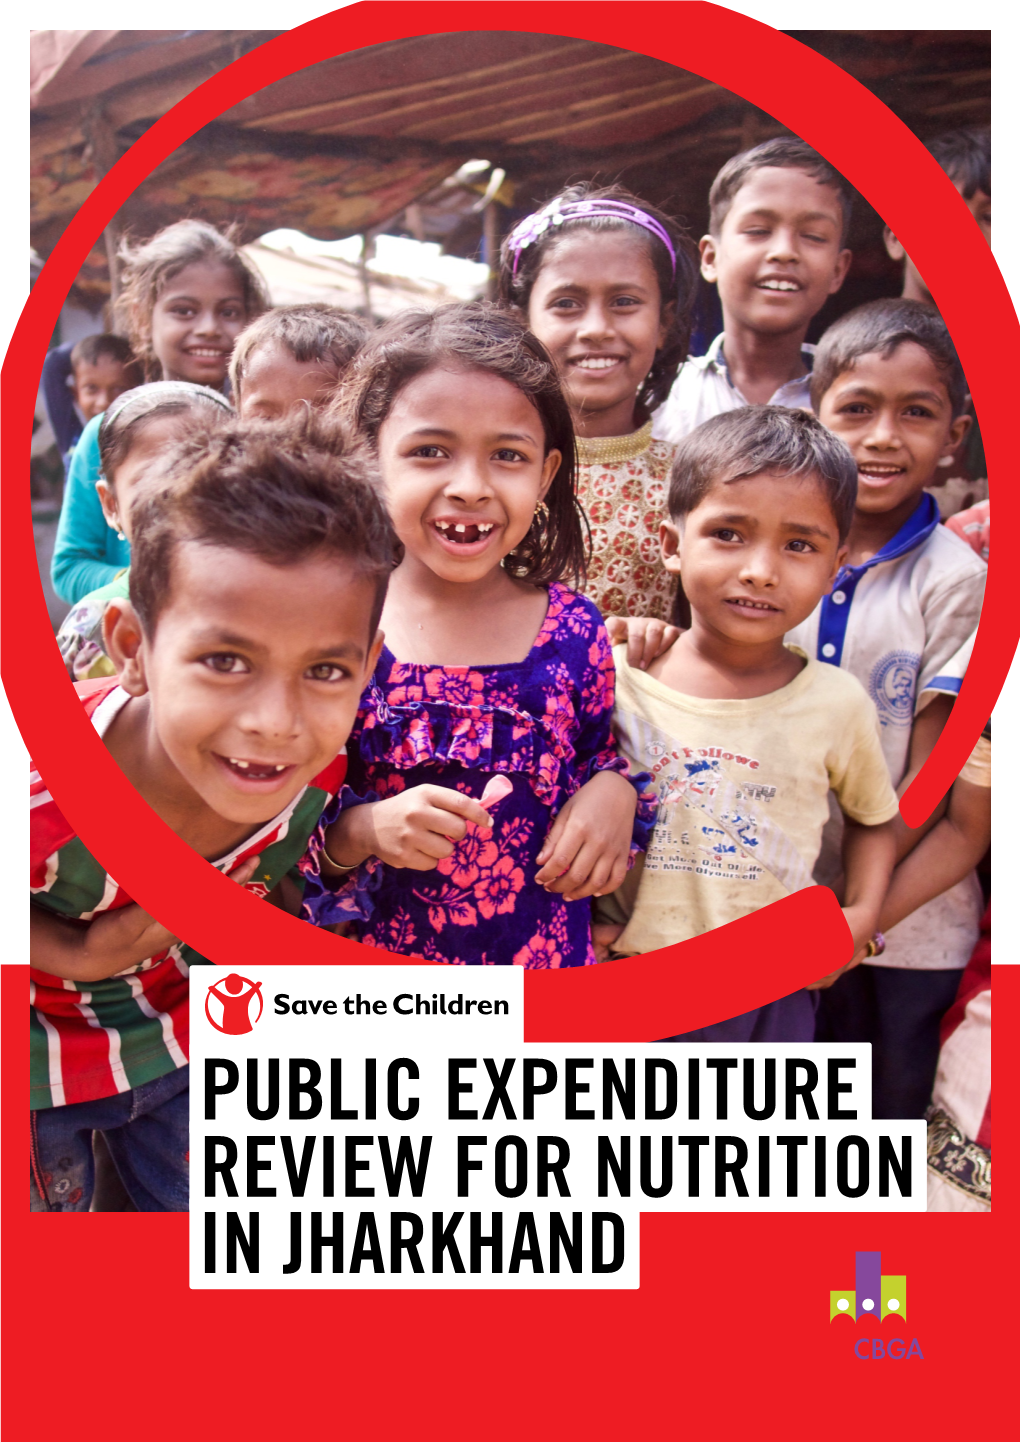 Public Expenditure Review for Nutrition in Jharkhand Is Presented in This Section with Reference to Three of the Four Key Objectives of the Project